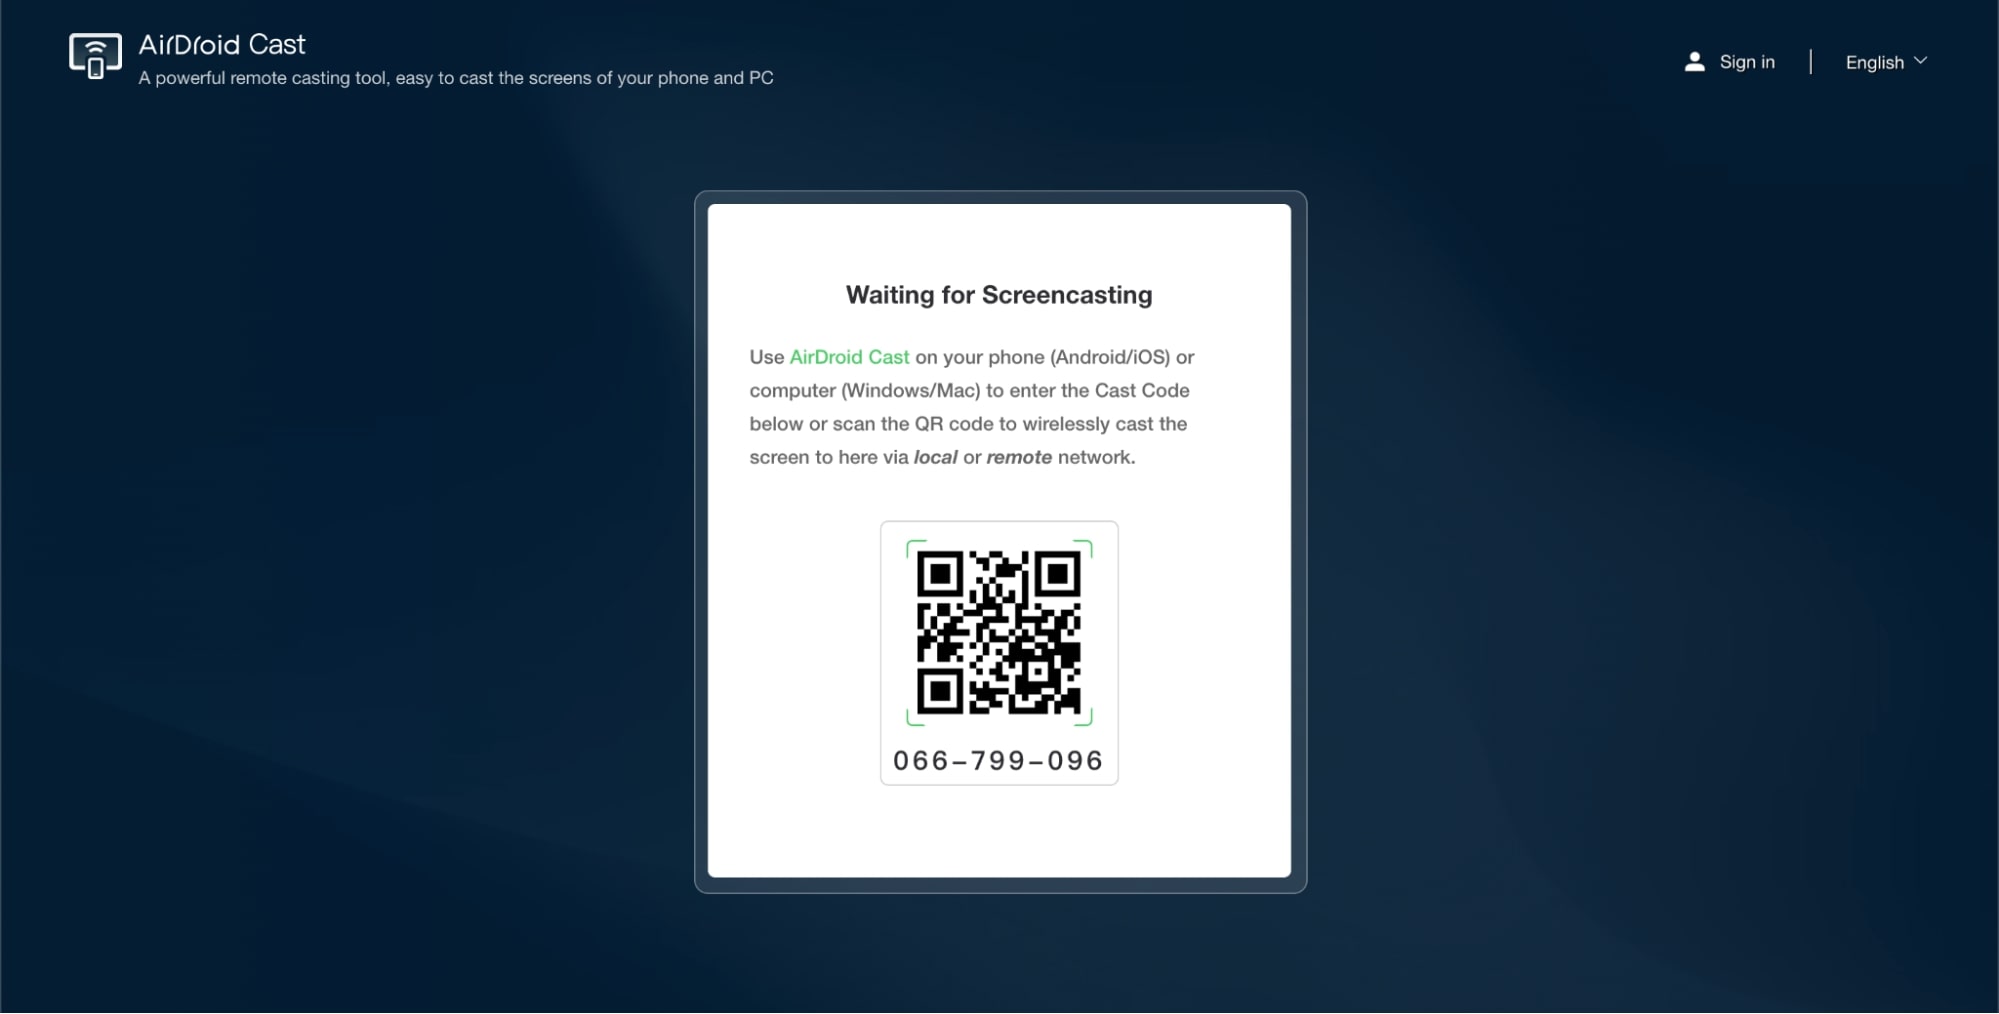 AirDroid Cast will have a QR code on the screen